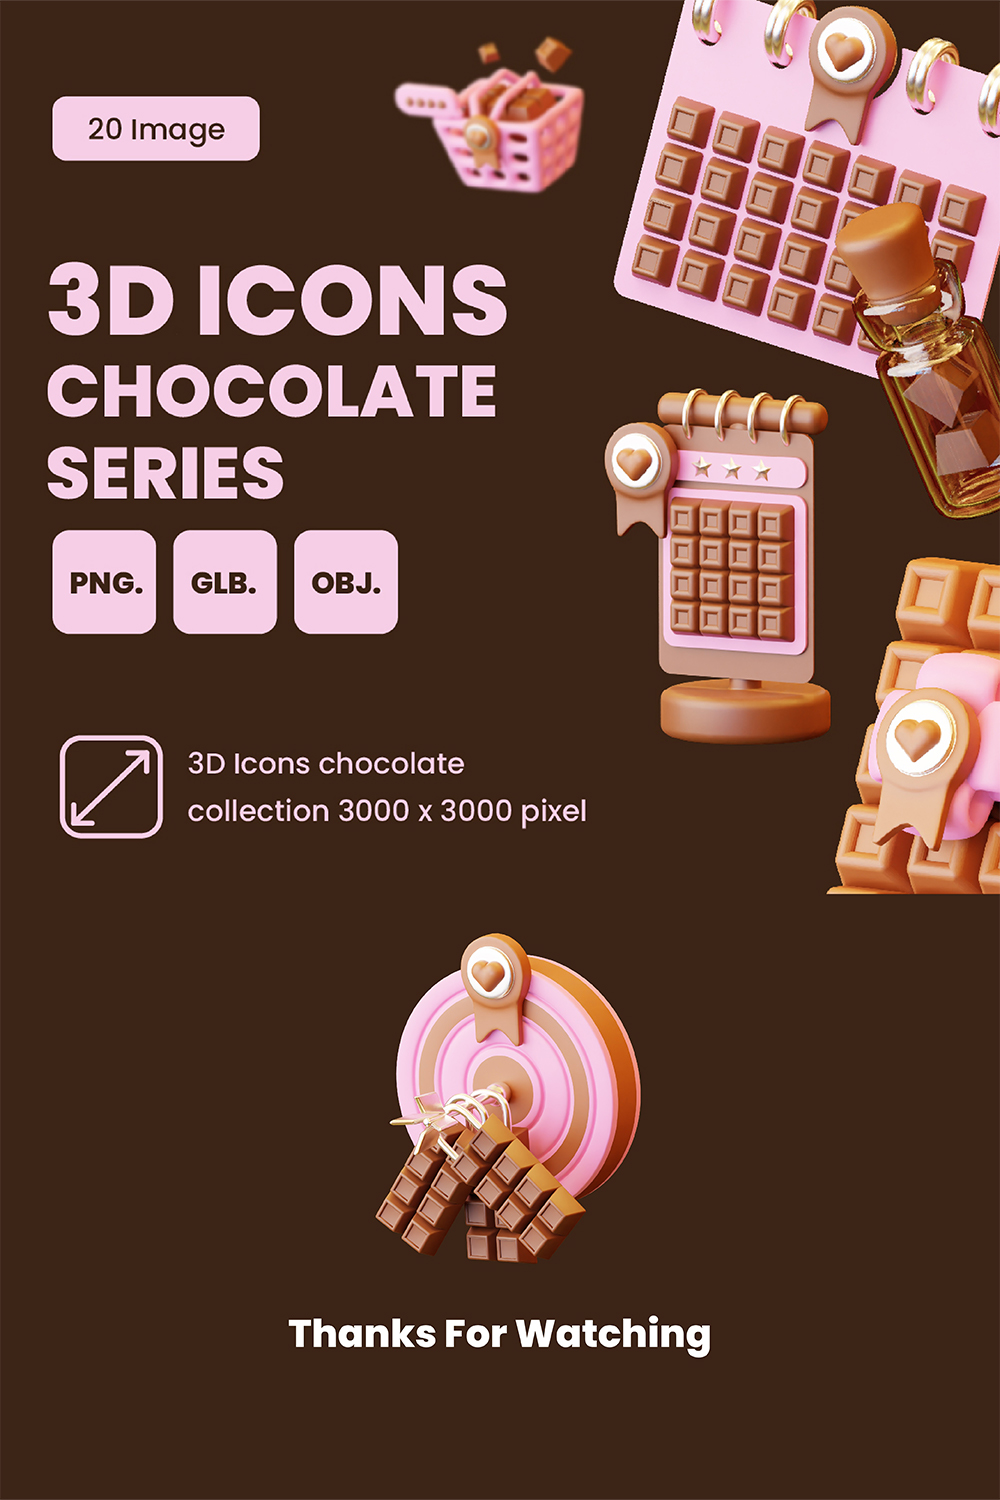 3d chocolate collection pinterest preview image.